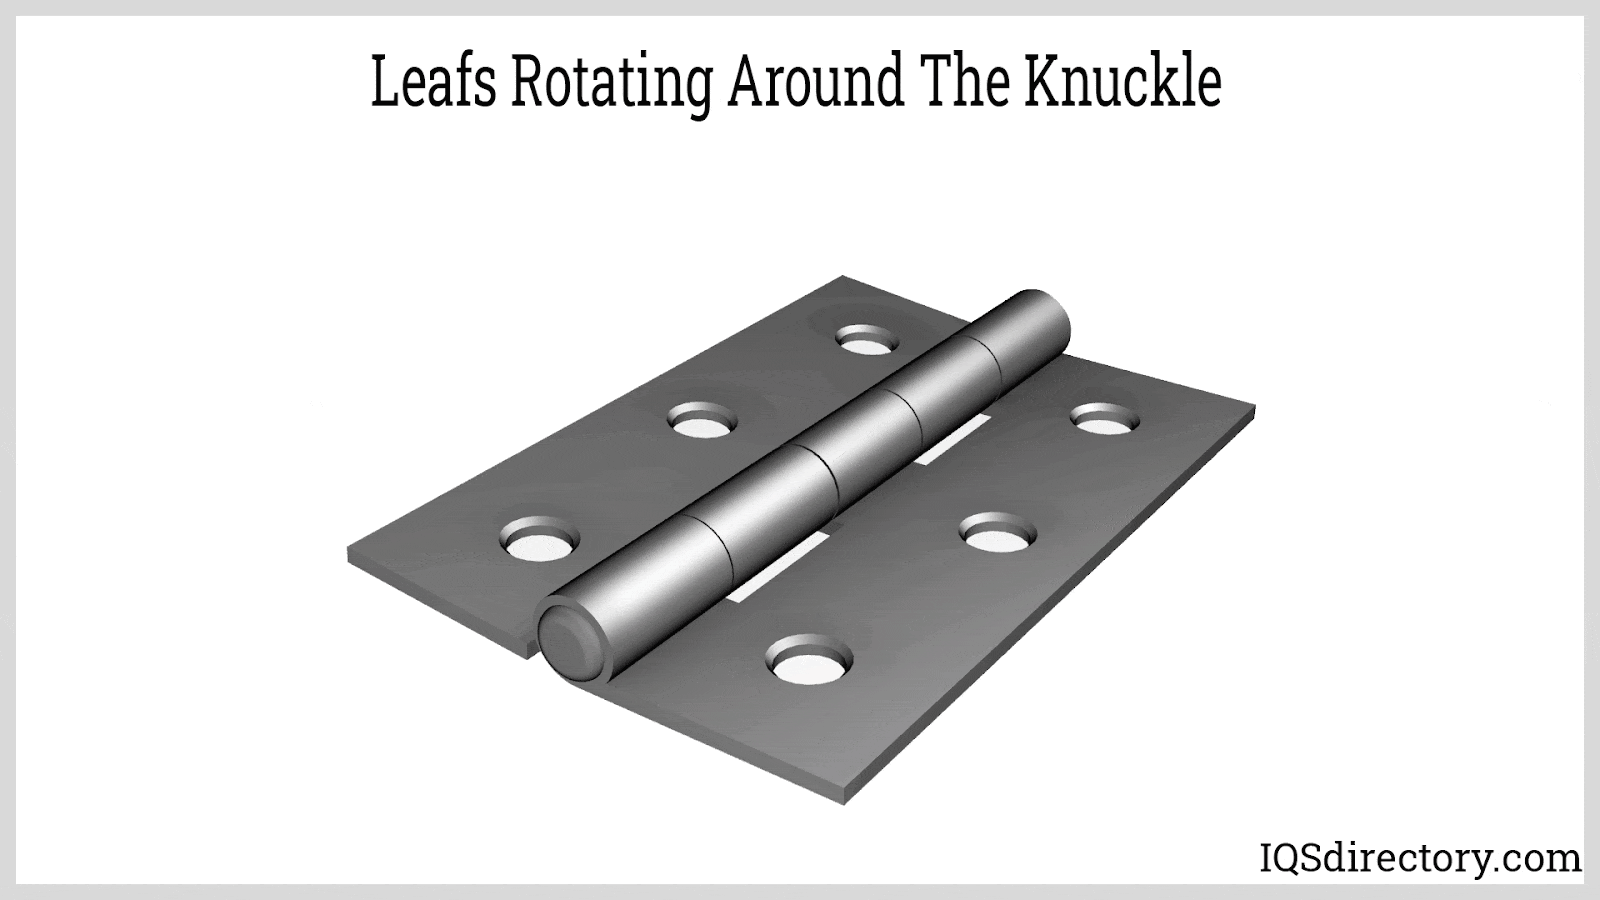 Leafs Rotating Around the Knuckle